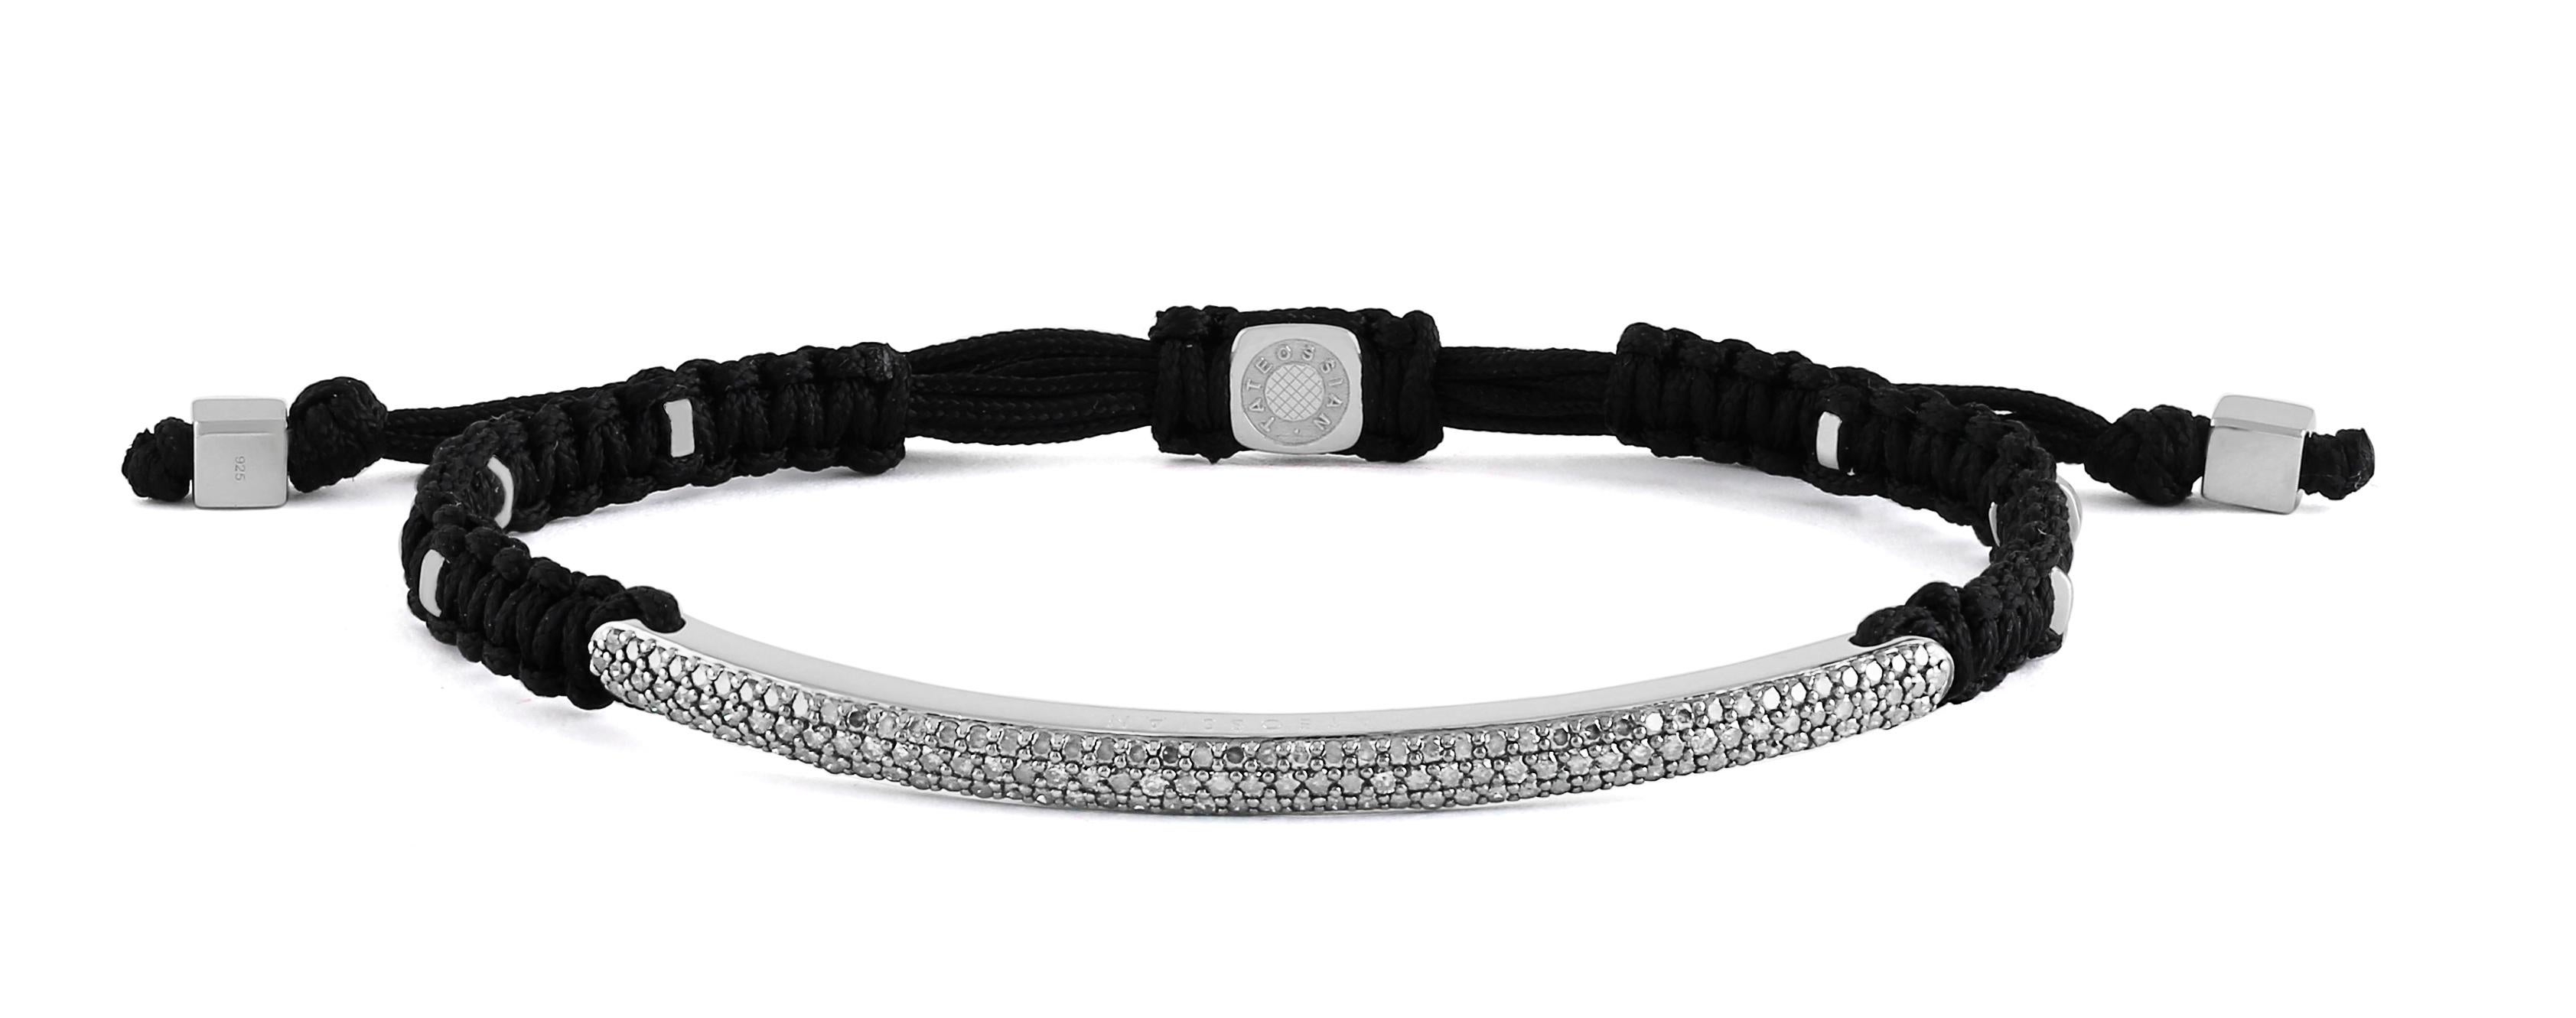 Windsor Baton Macrame Bracelet In Black With White Diamond - XS-S (15-16cm)  In New Condition For Sale In Fulham business exchange, London